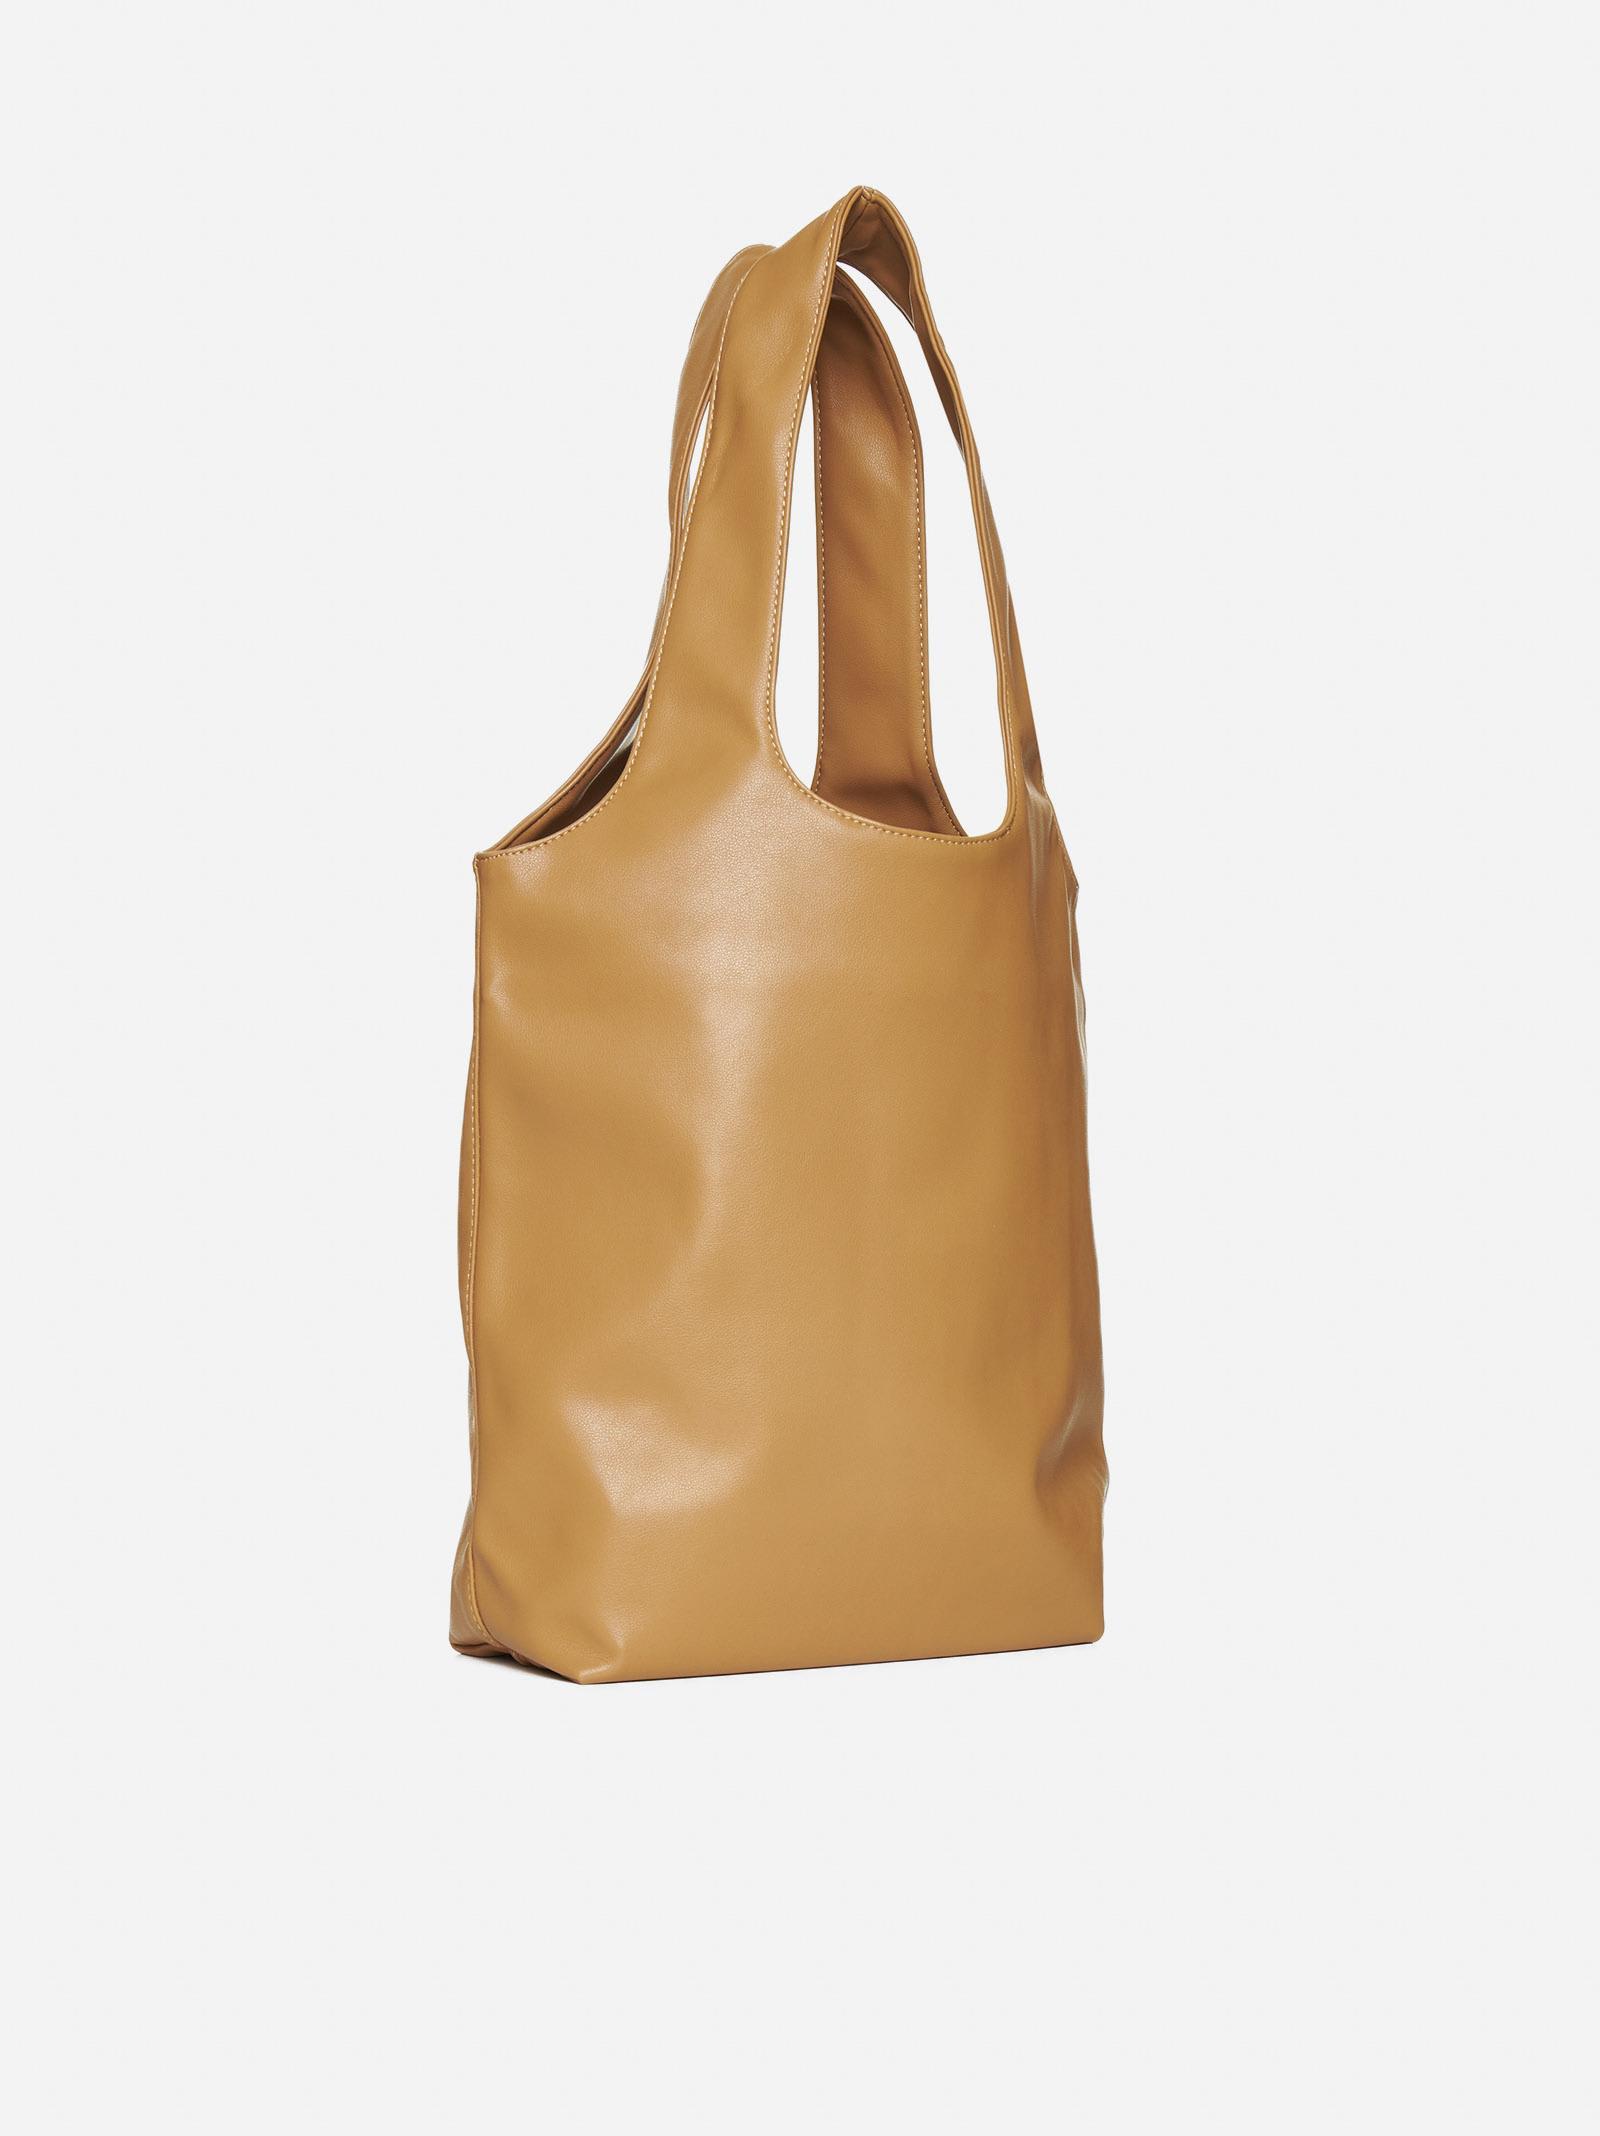 Ninon Faux Leather Tote Bag in Brown - A P C